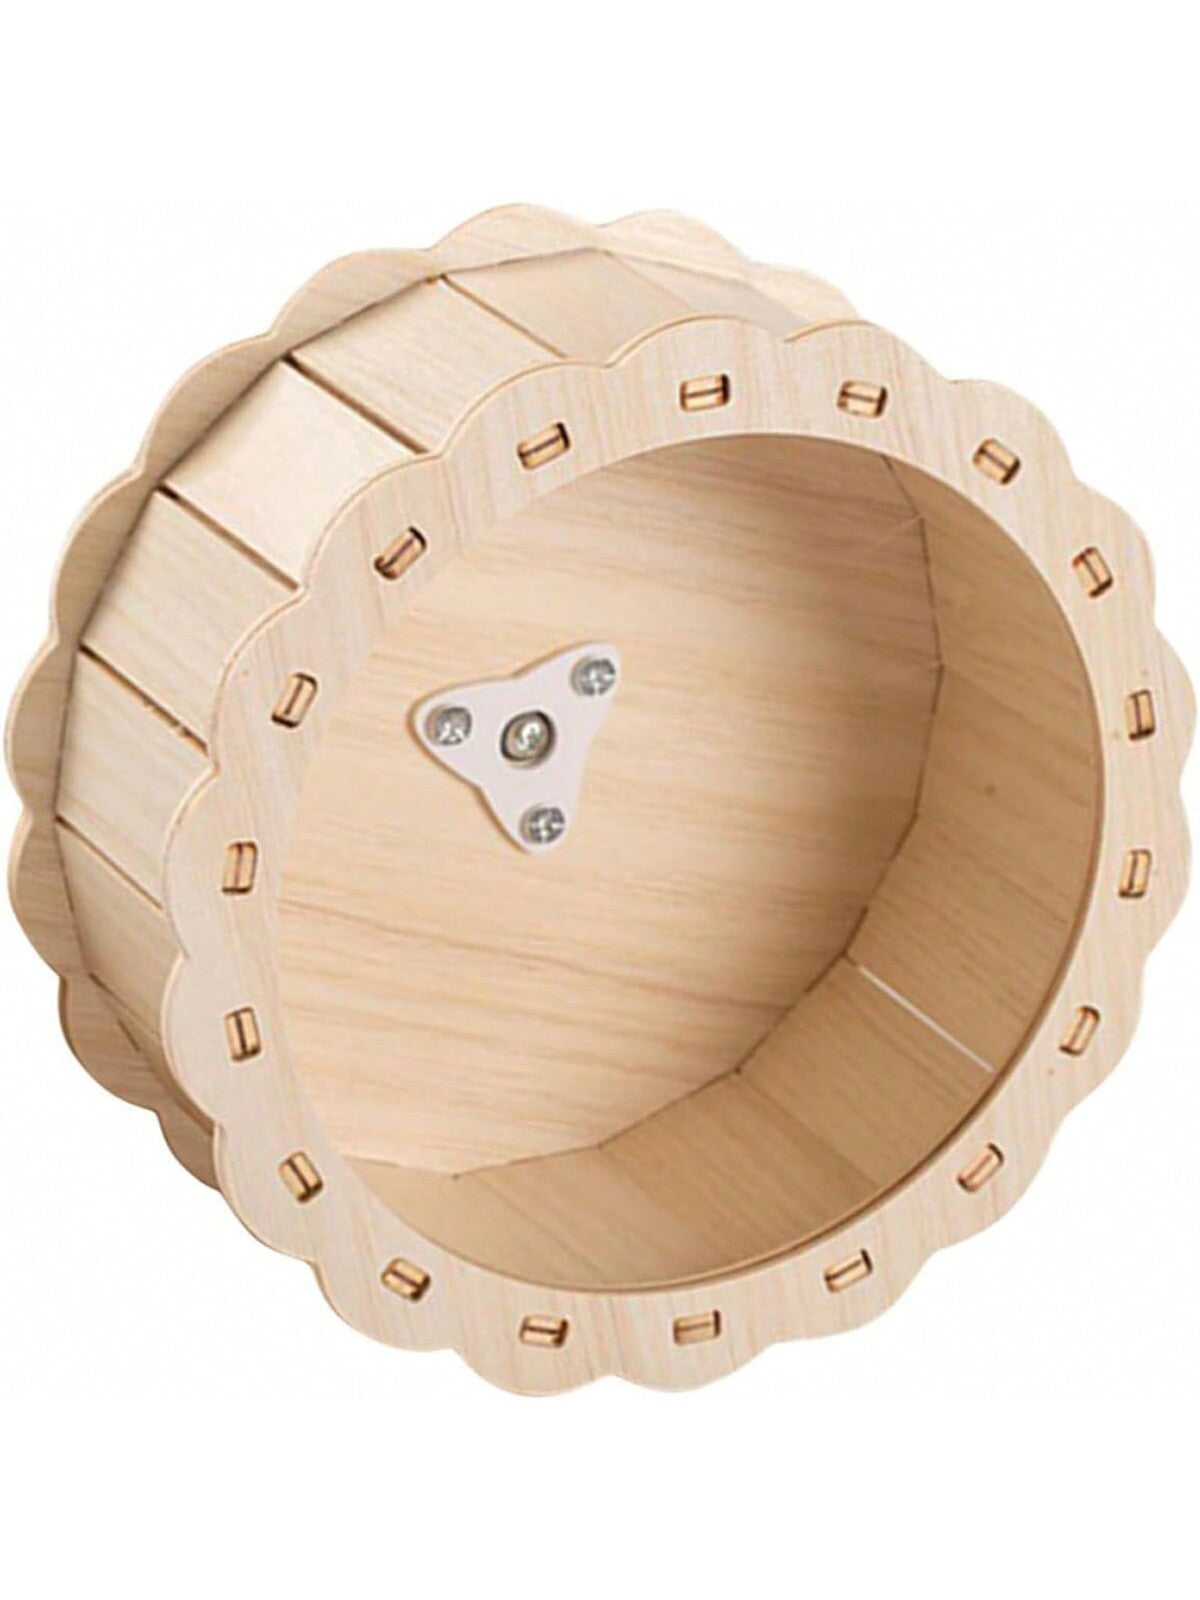 Wooden Hamster Exercise Running Wheel, Small Animal Silent Toy for Small Pet 💜